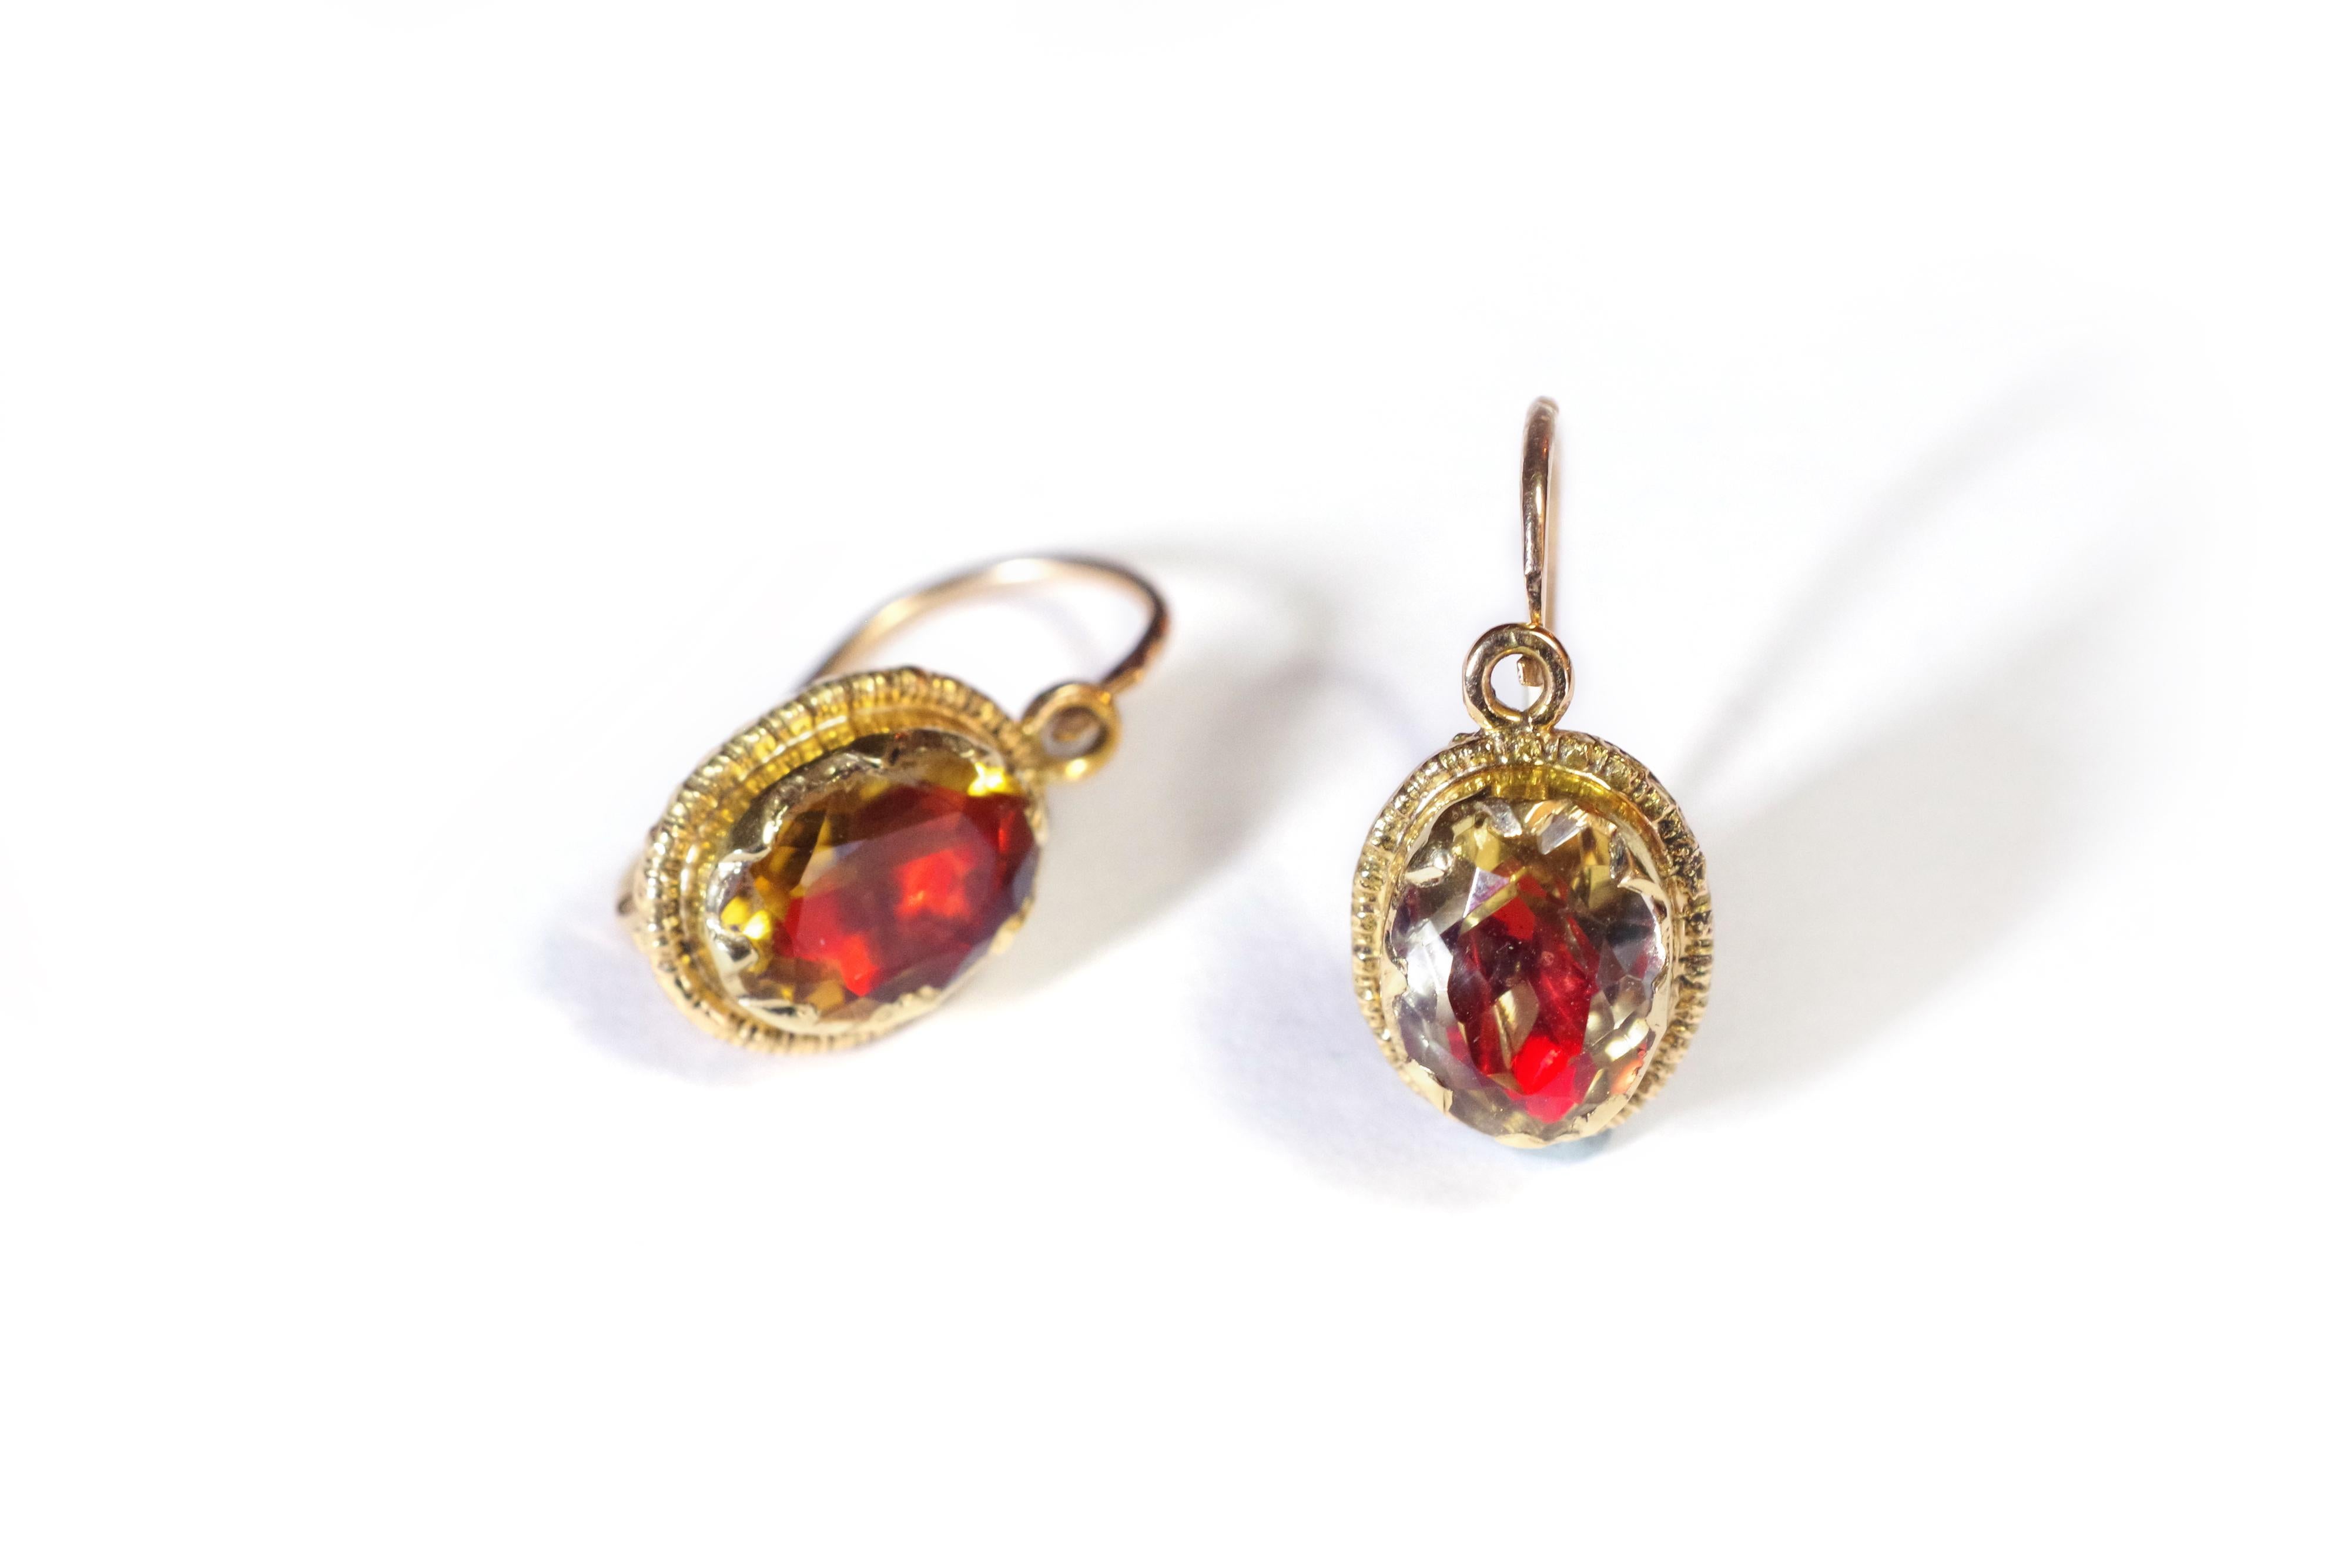 French regional citrine earrings in yellow gold 18 karats. Earrings decorated with a foiled facetted oval citrine, in a closed setting. These citrines are called 